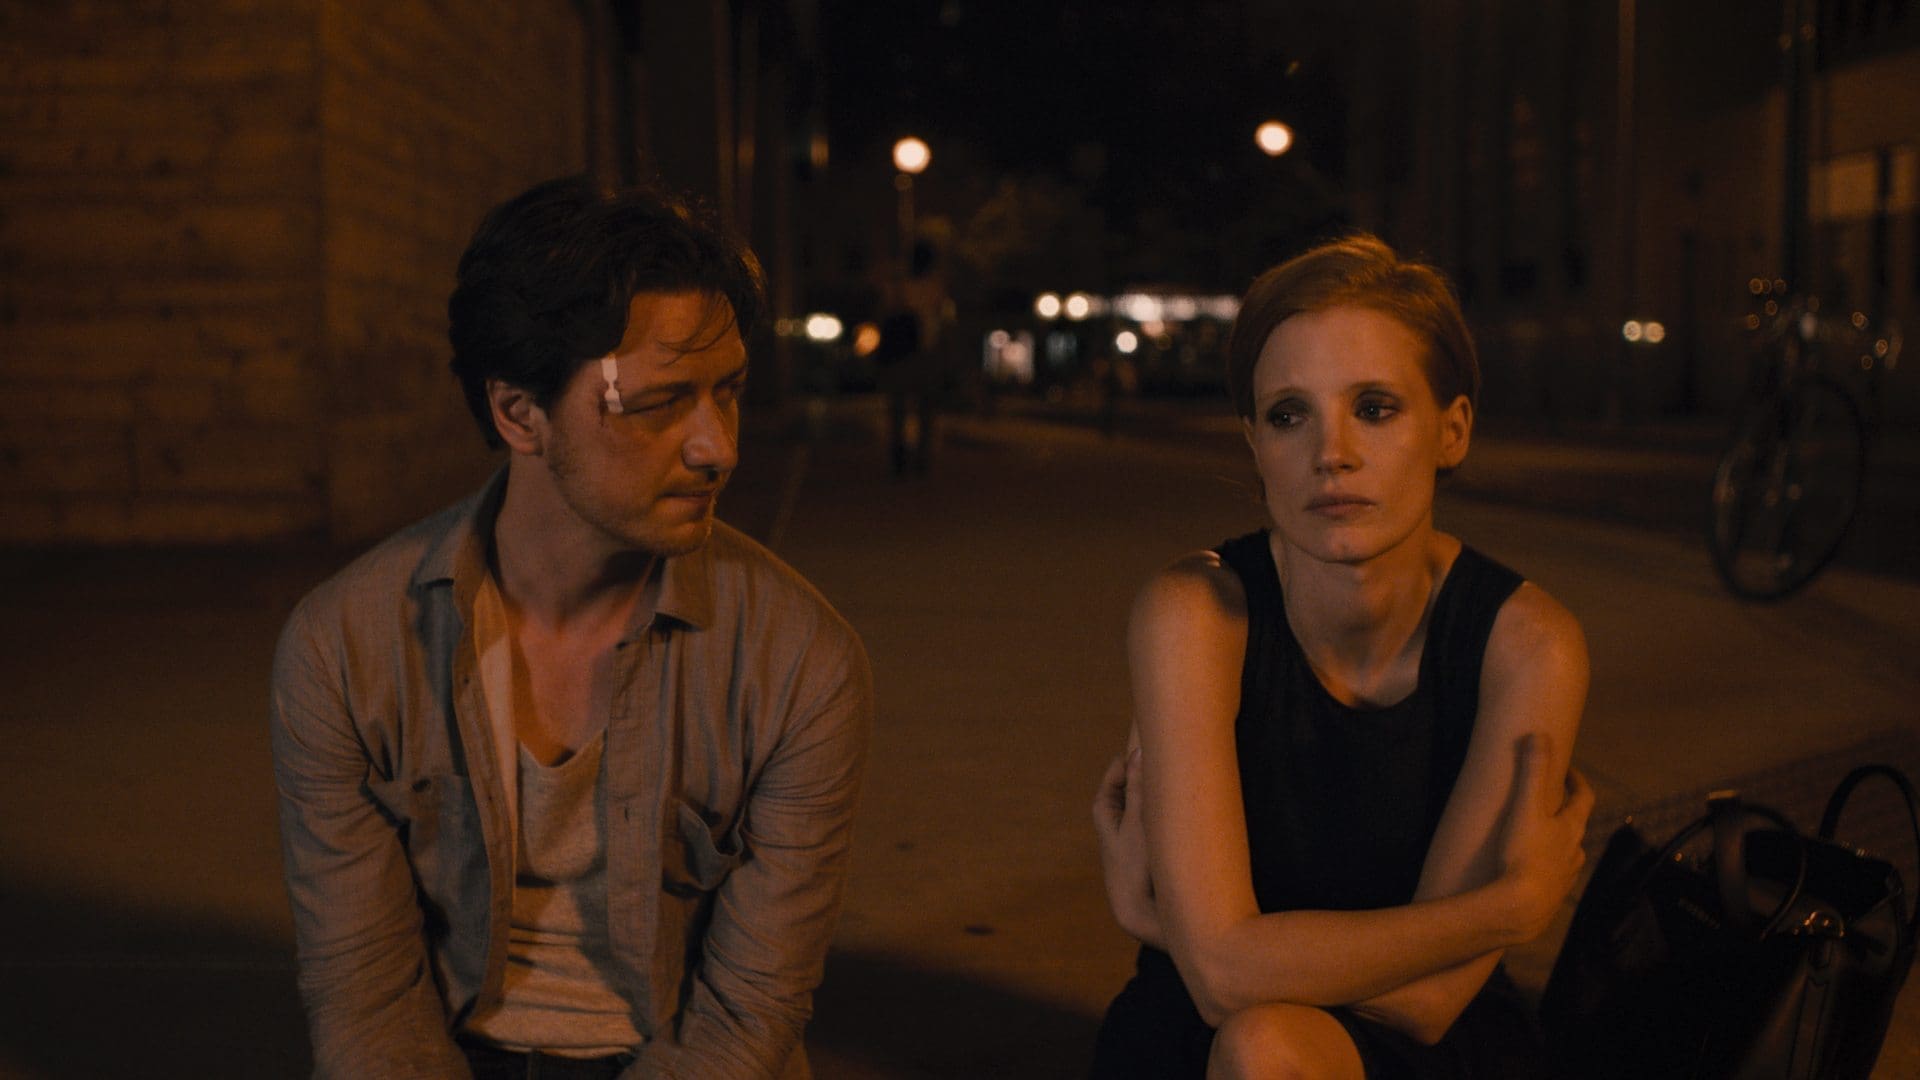 Eleanor Rigby, james mcavoy, jessica chastain, Ned Benson, NYC, The Disappearance of Eleanor Rigby, Viola Davis